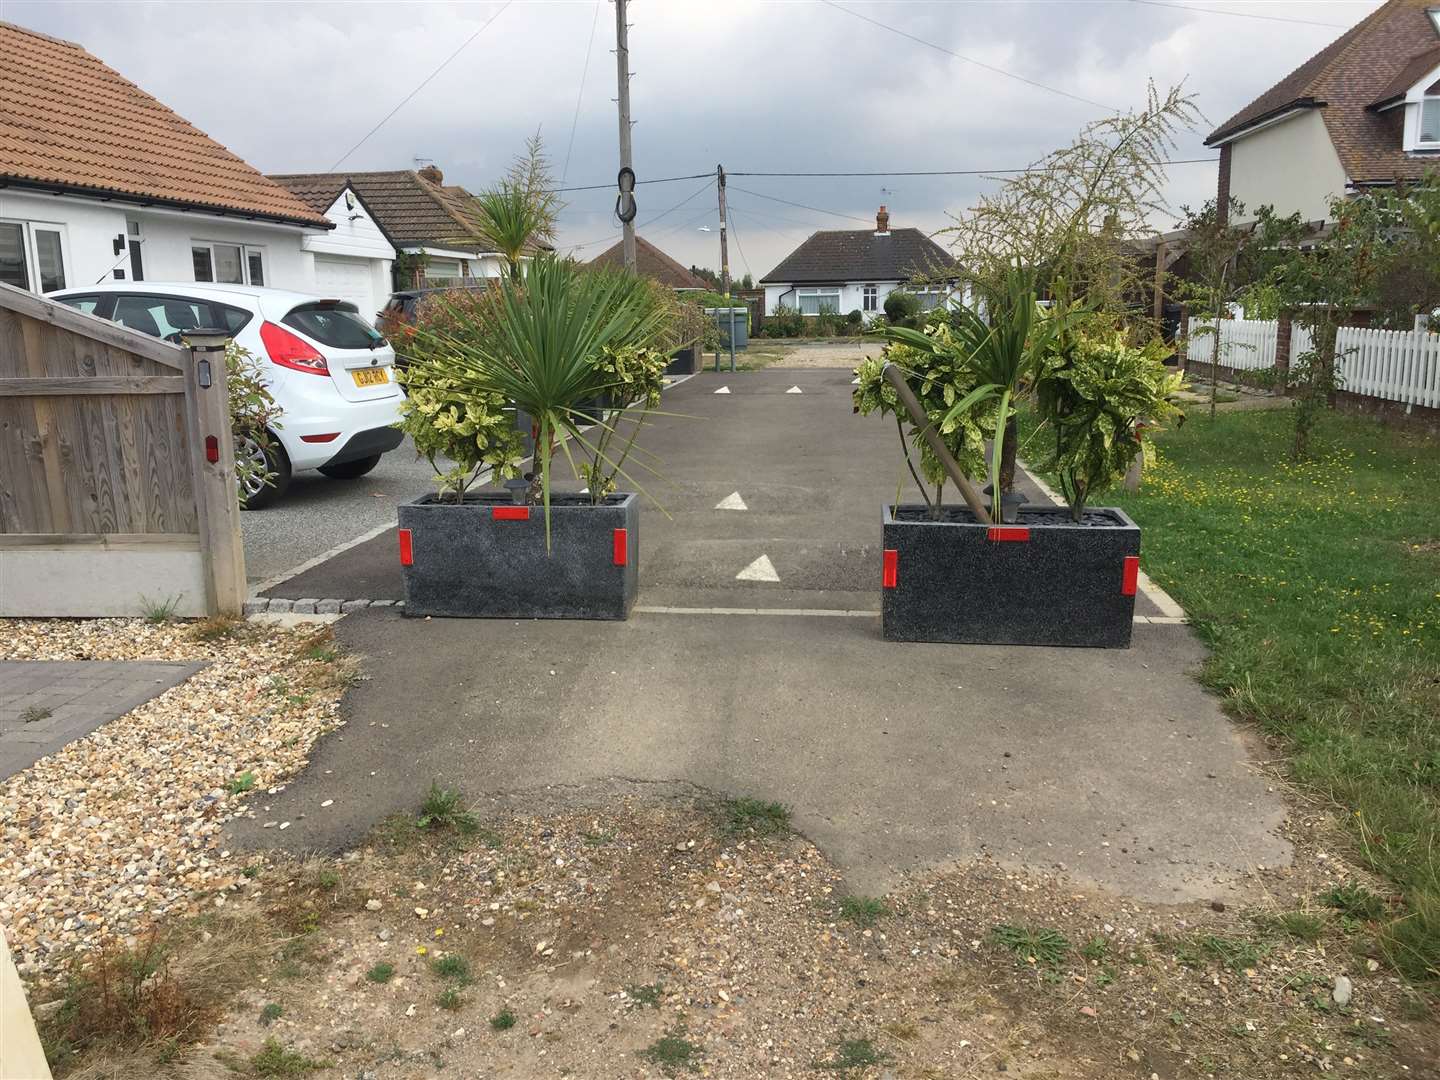 Planters have now been put in to block off part of the road